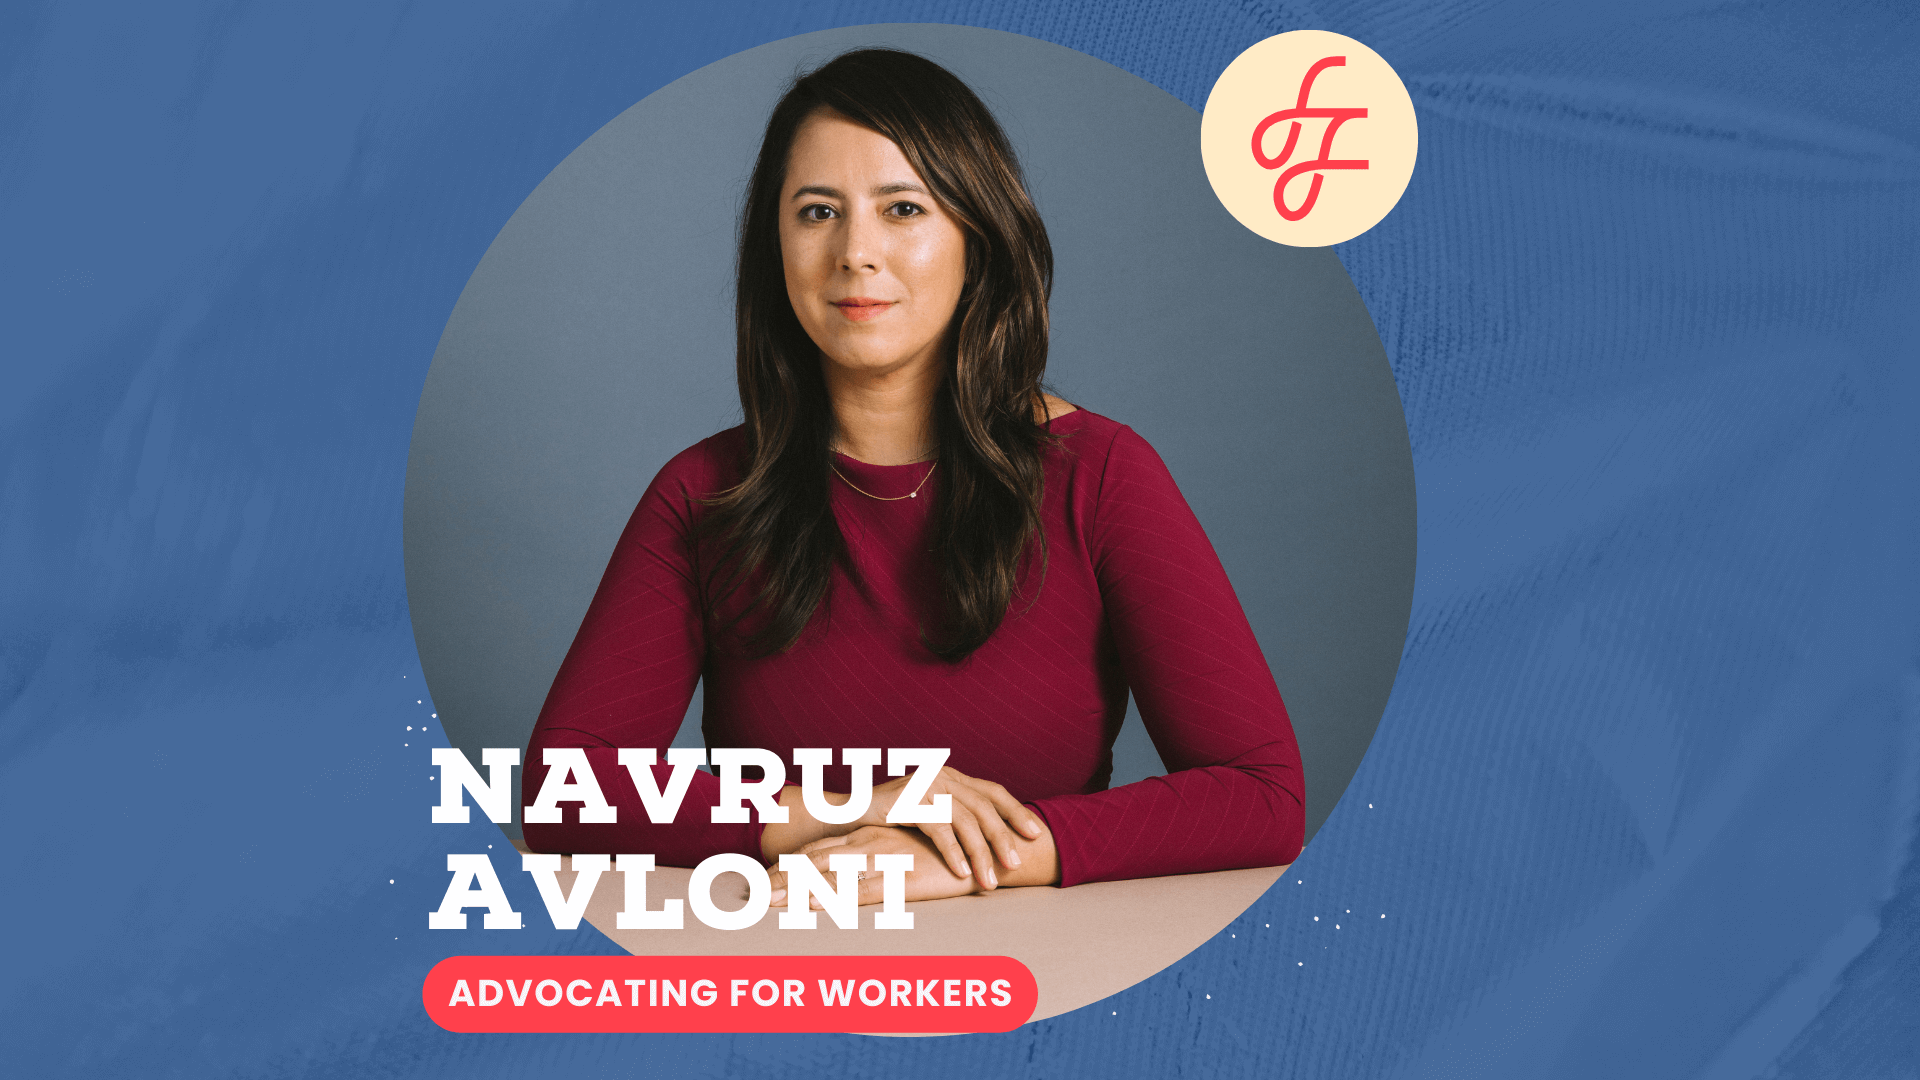 A white woman with long brown hair wearing a ruby-red dress sitting with her hands crossed on a table smiling at the camera on a blue background with the words "Navruz Avloni, Advocating for Workers"